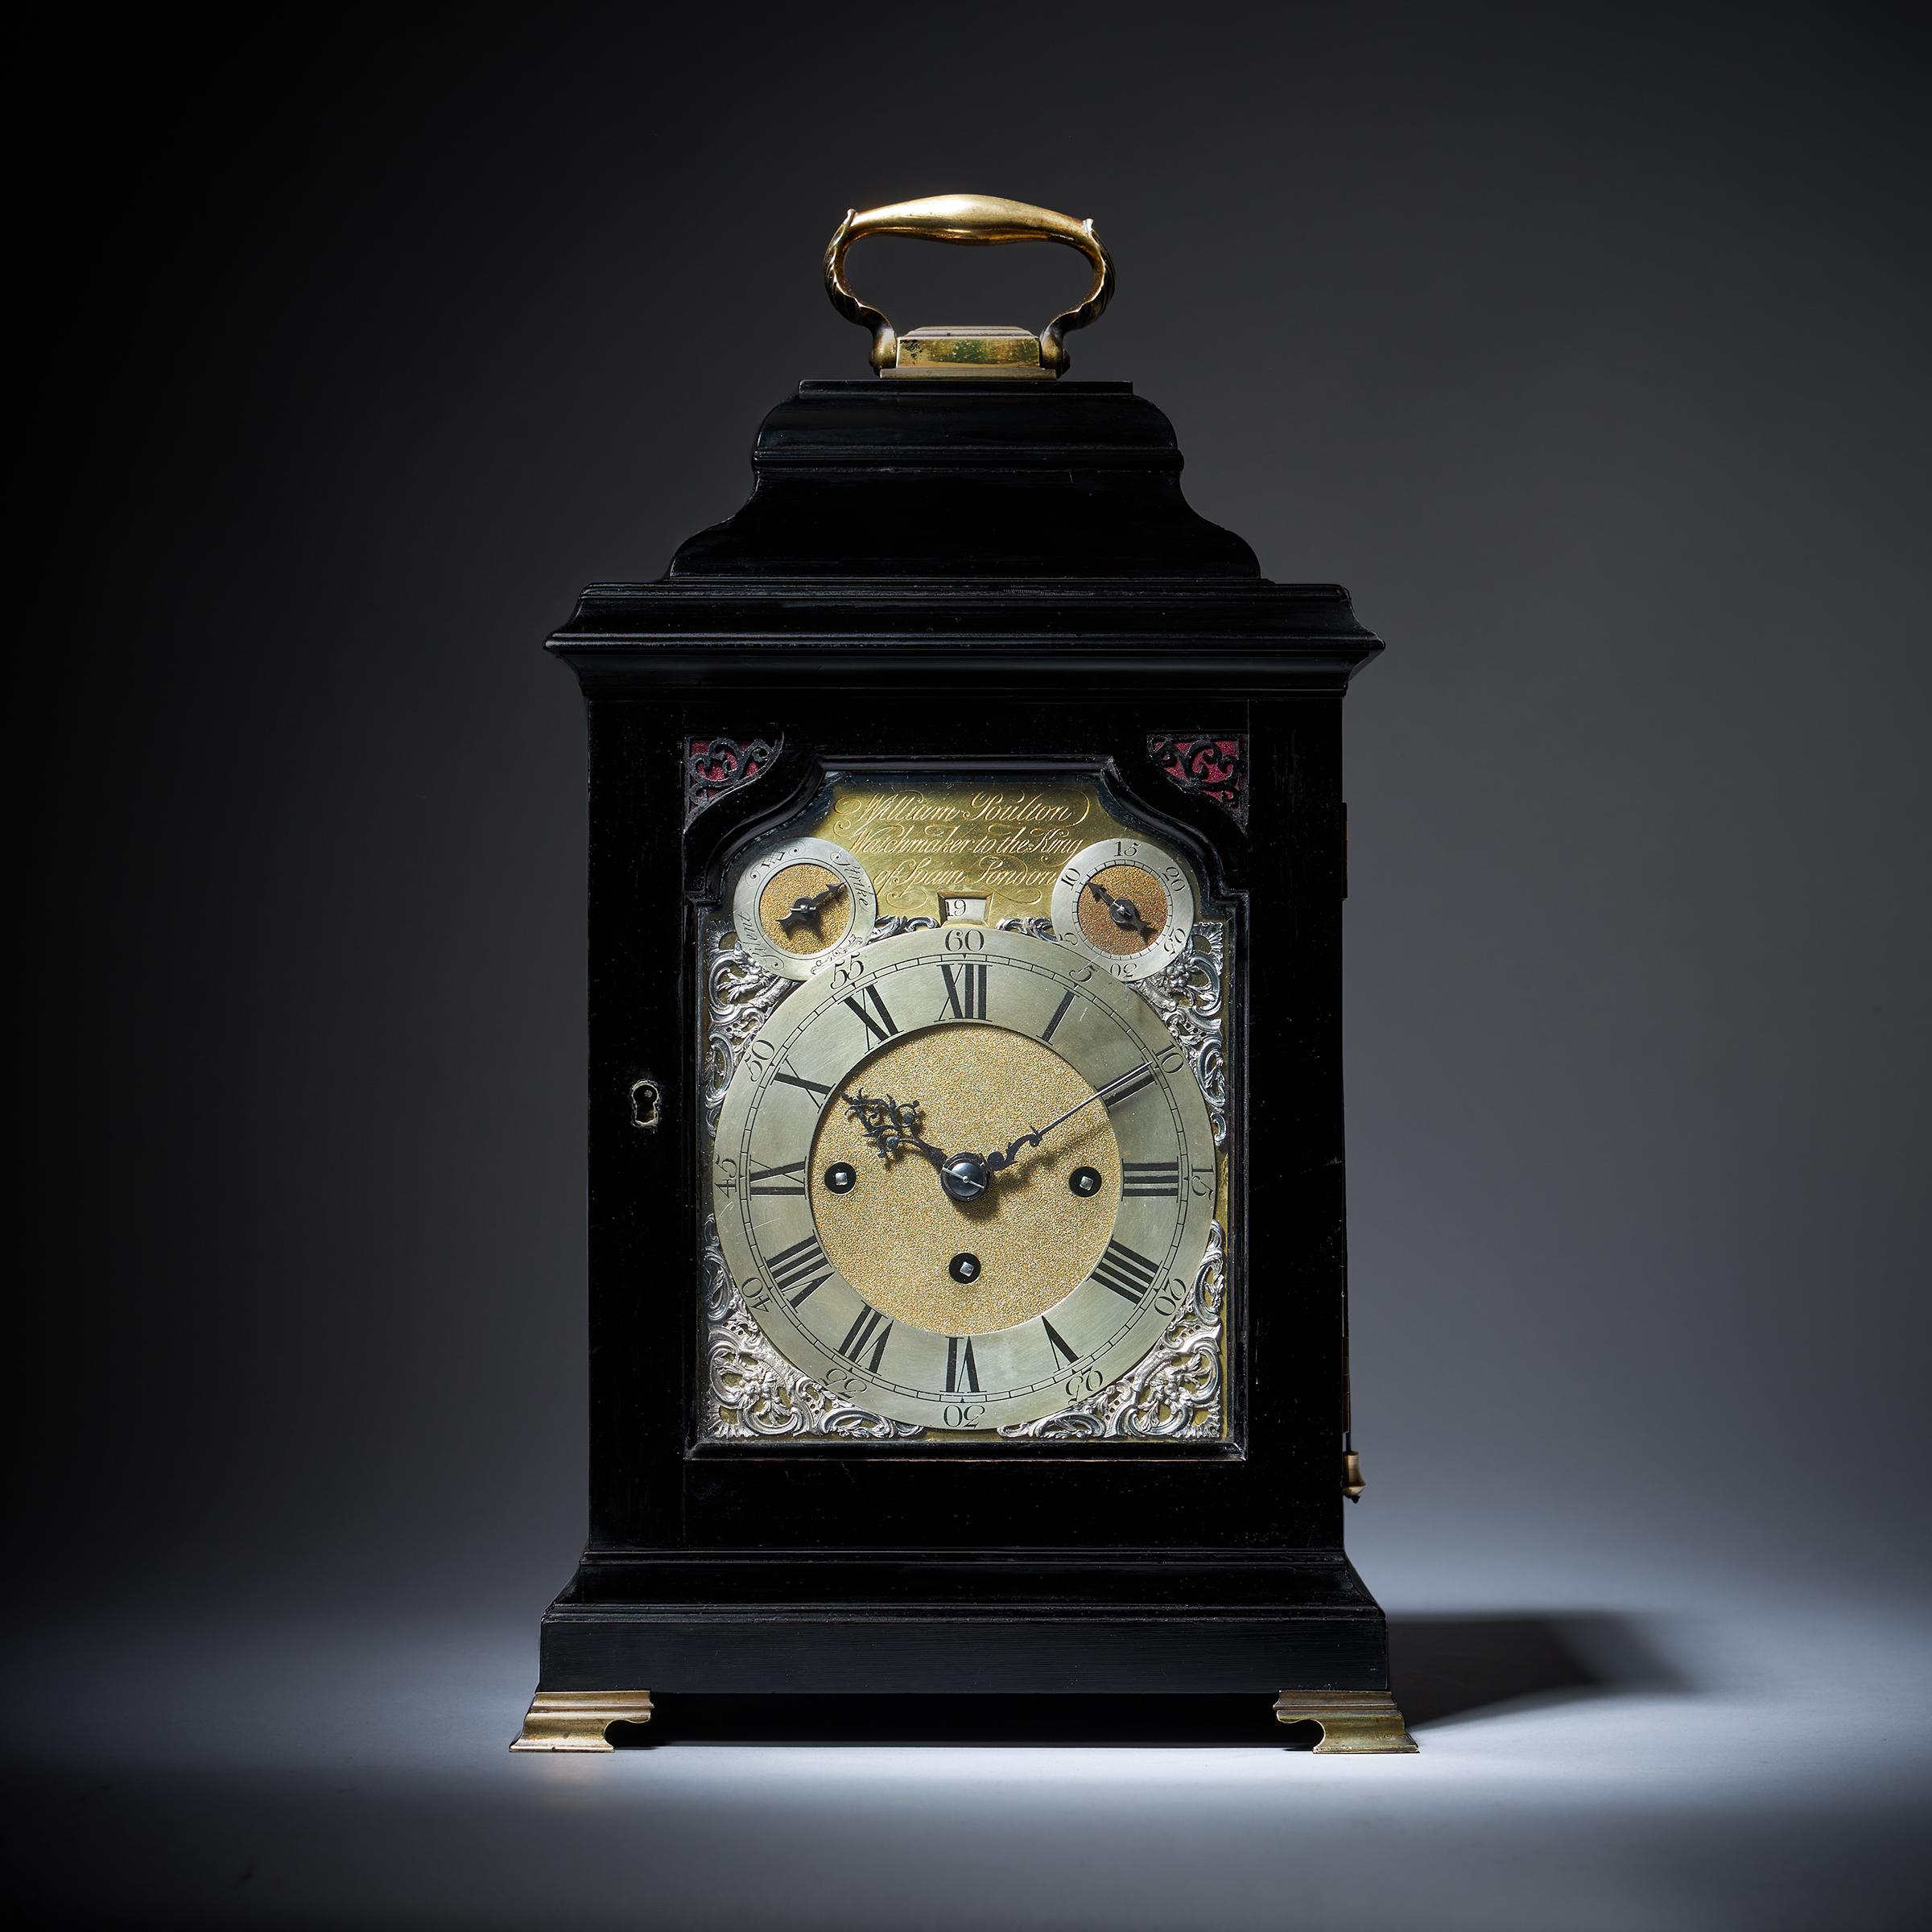 Rare 18th-Century Grande Sonnerie Striking table Clock by William Poulton 1